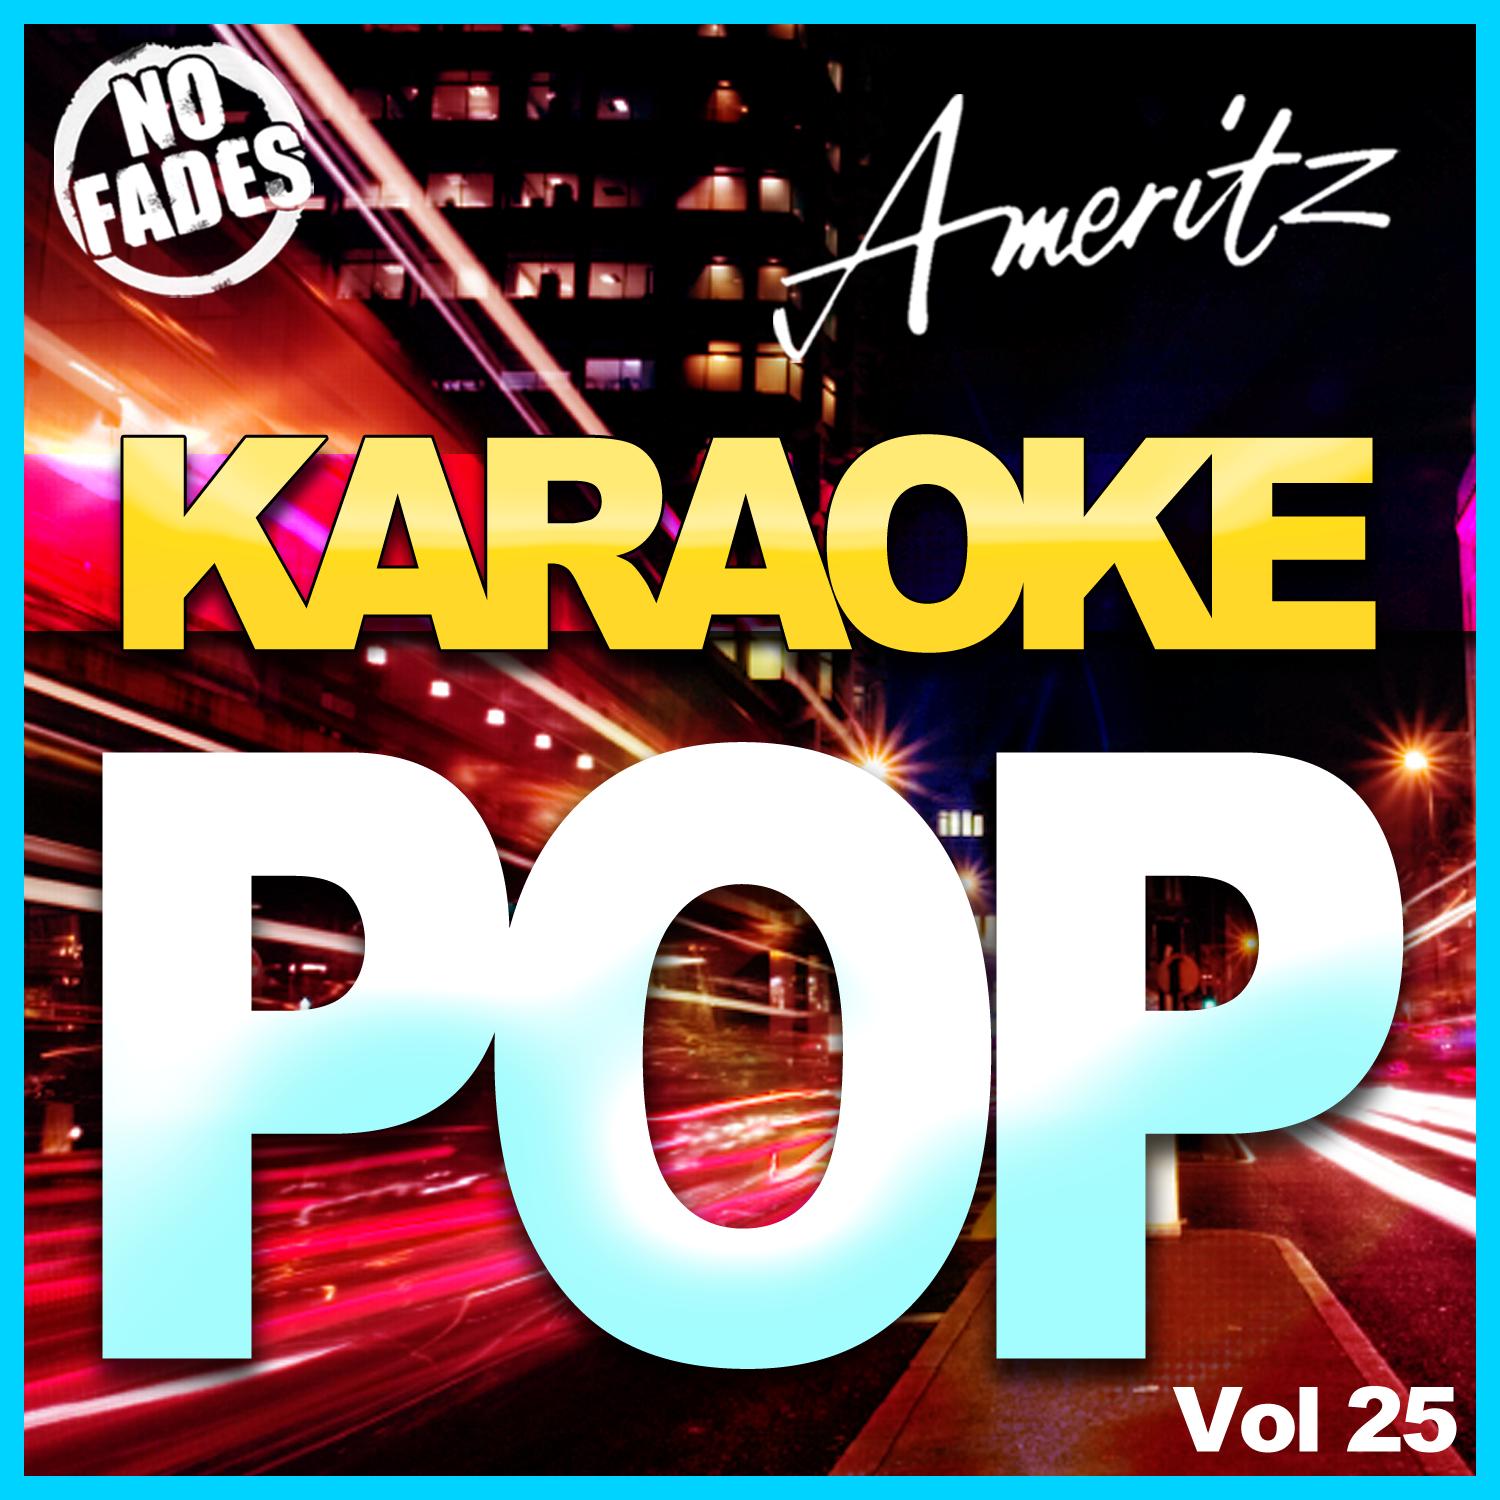 Can't Make This Over (In the Style of Pixie Lott) [Karaoke Version]